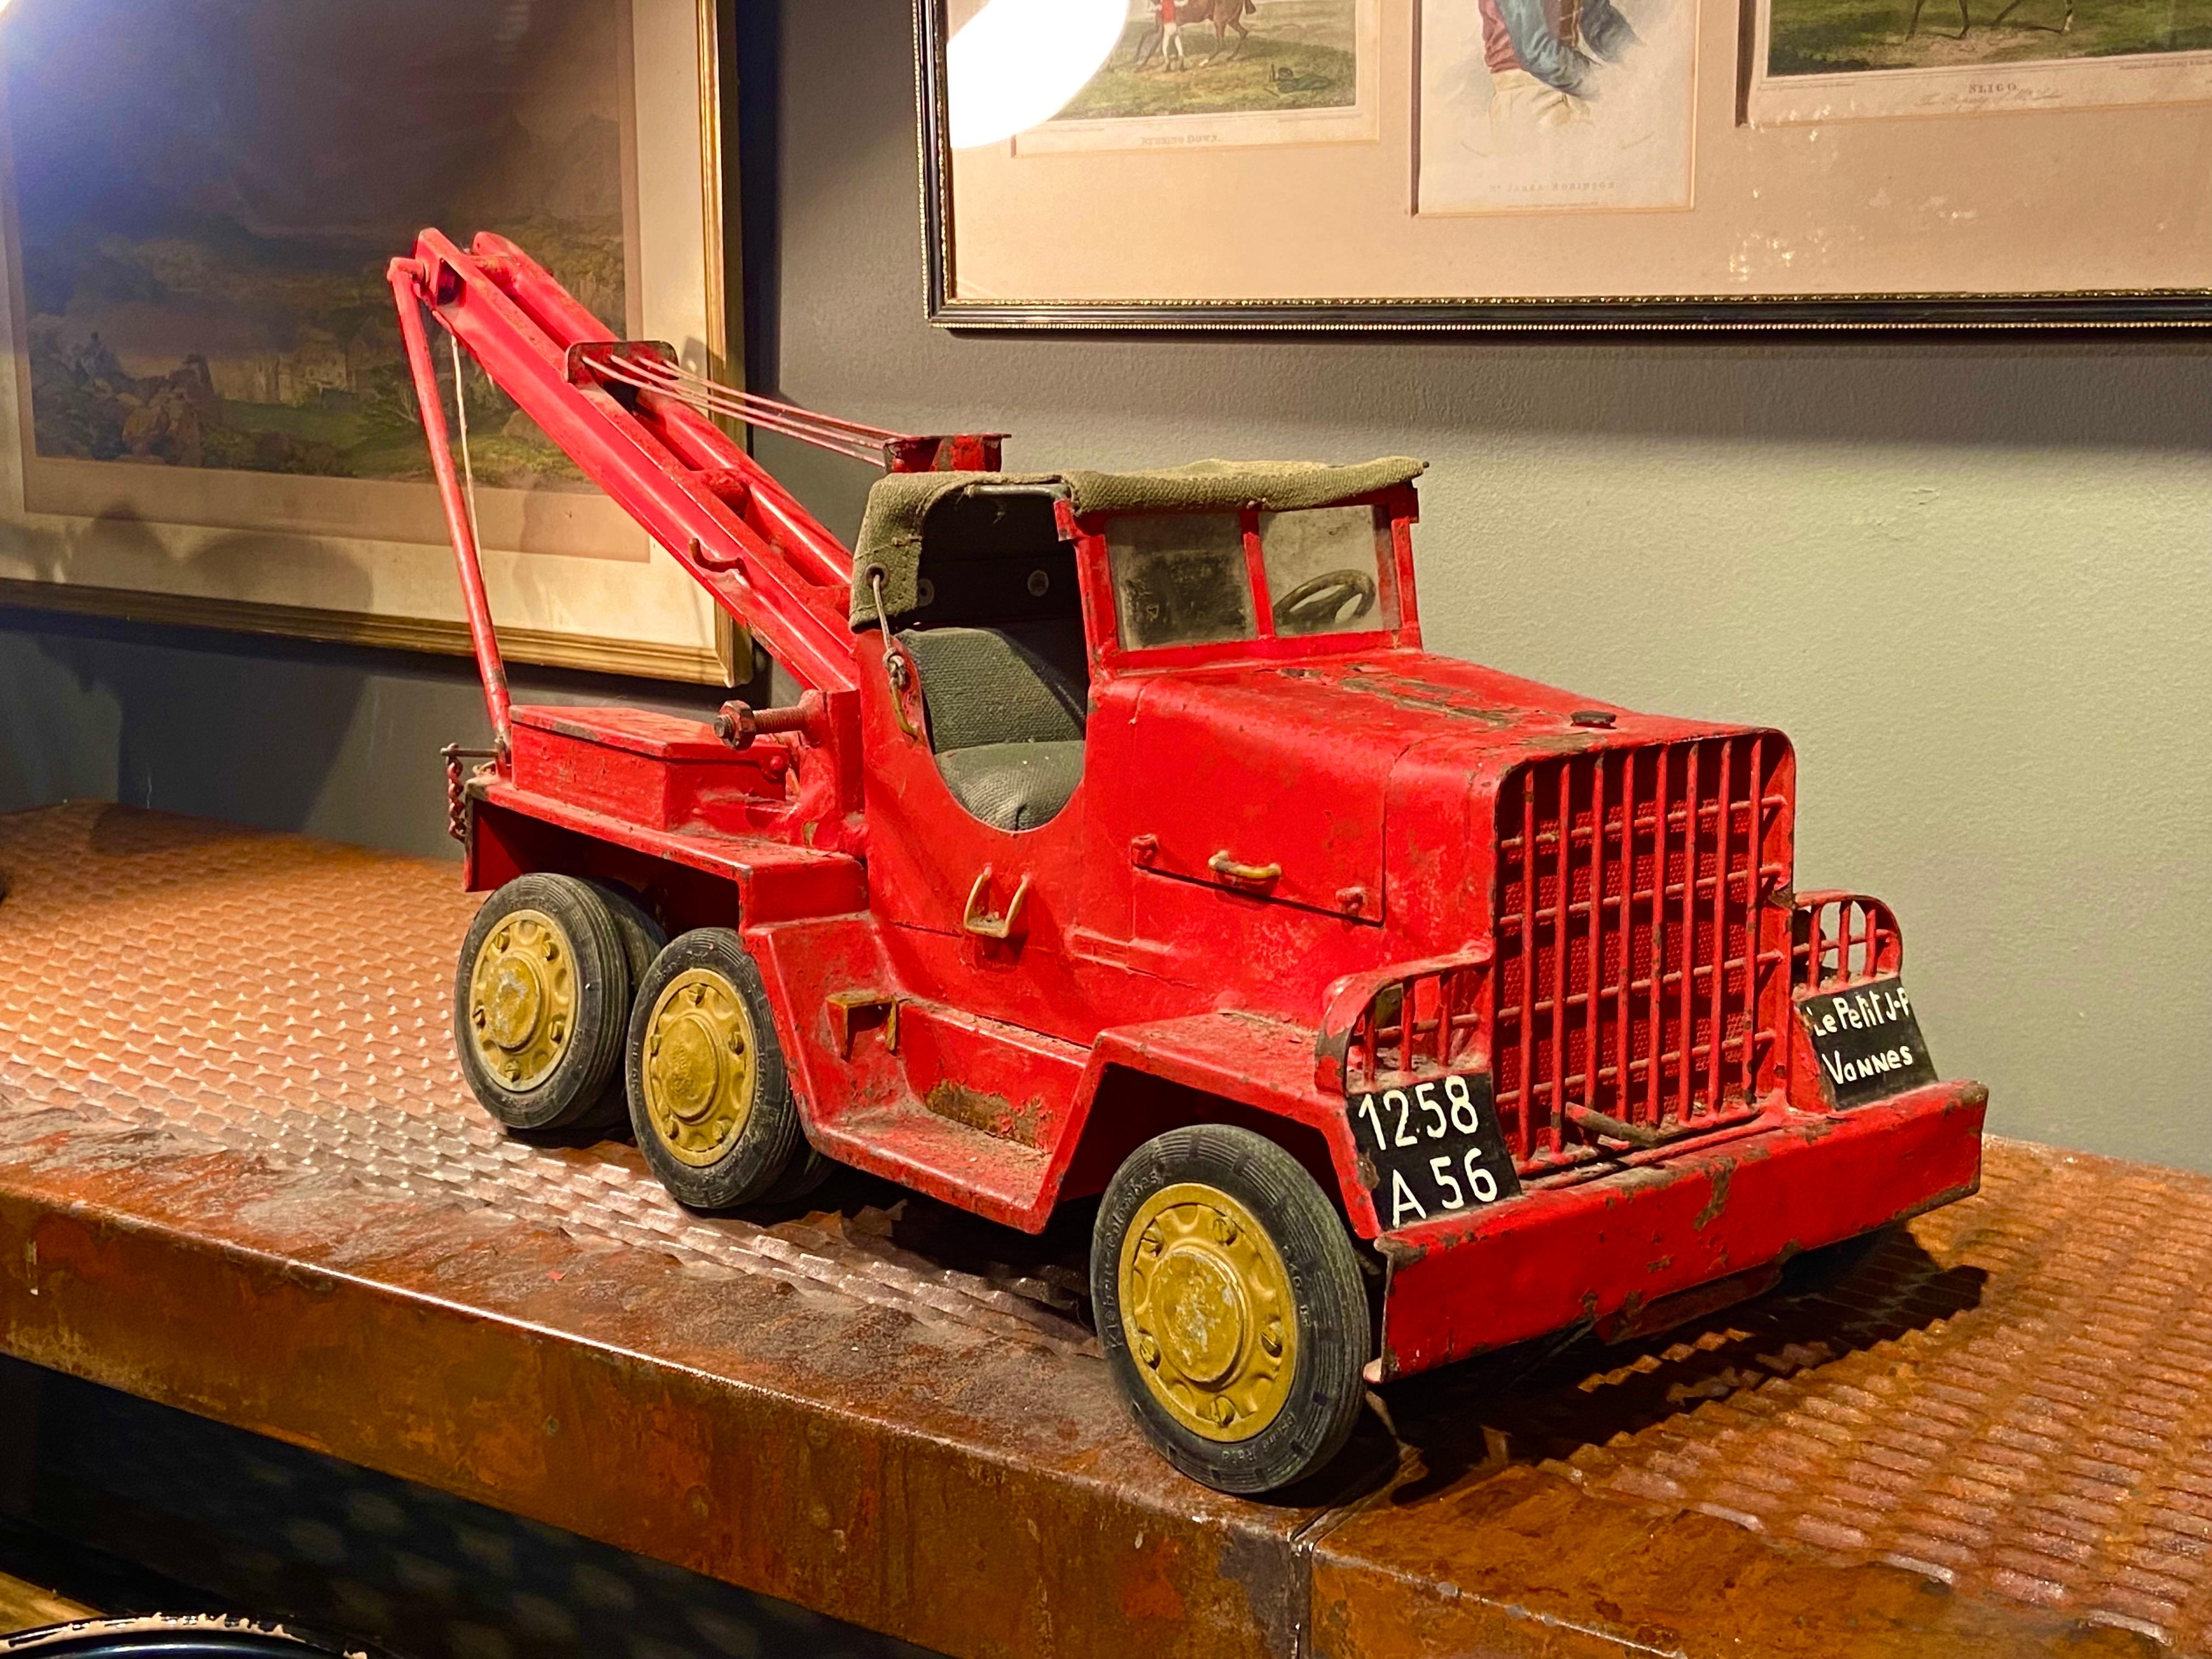 Large toy tow truck made in red lacquered metal with nice details and opening compartments.
France, circa 1930.